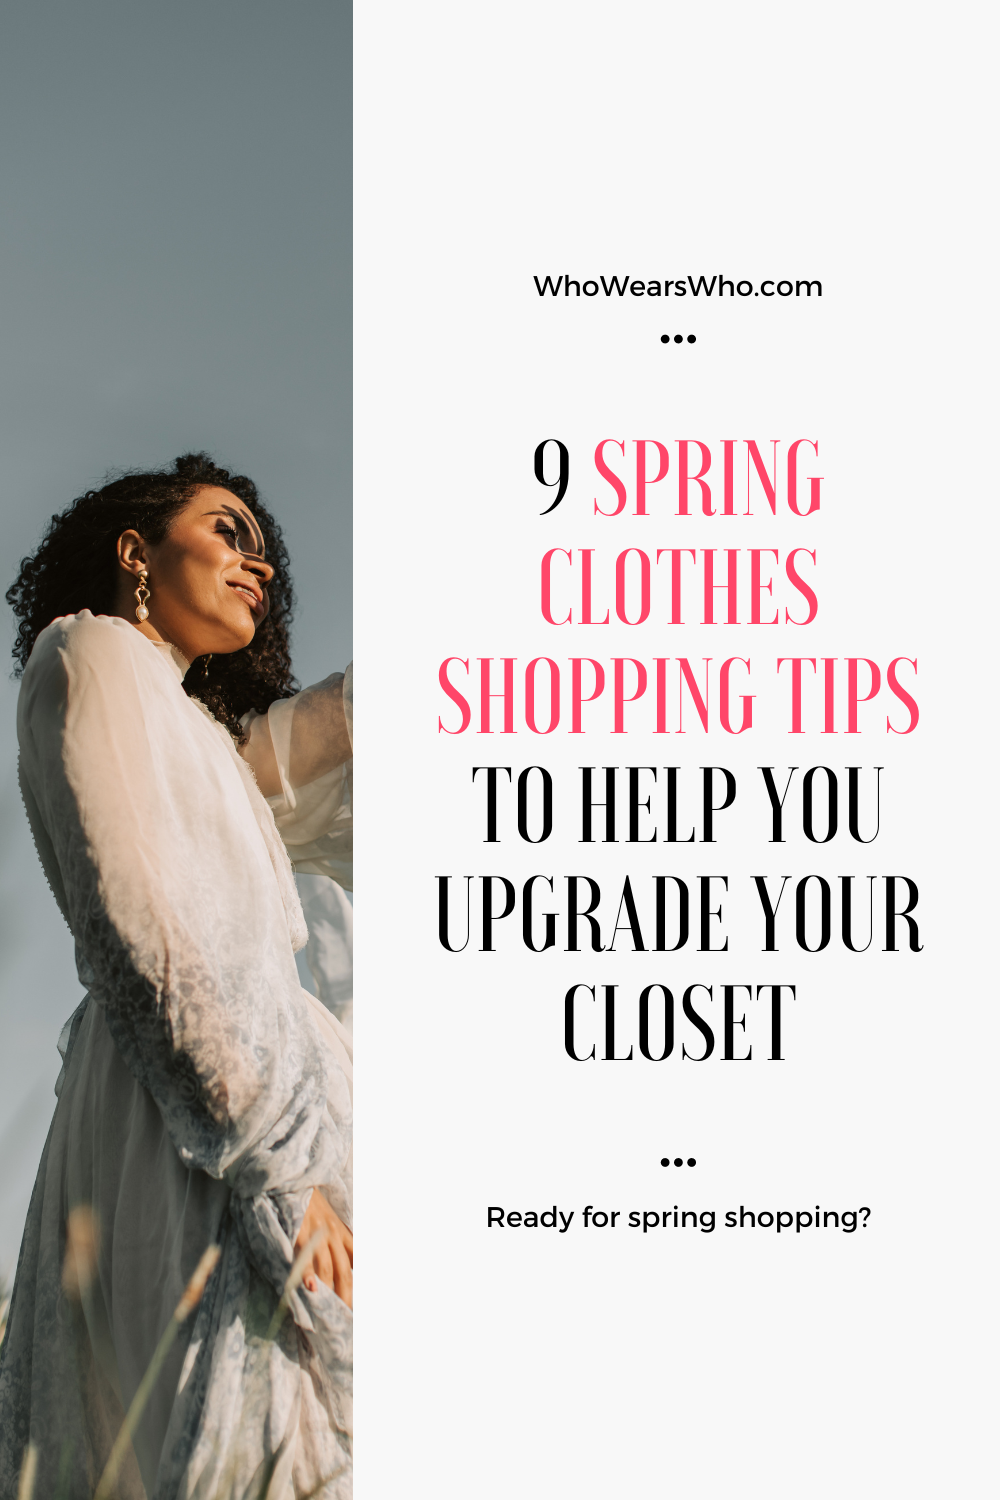 9 Spring Clothes Shopping Tips to Help You Upgrade Your Closet Blog Graphic